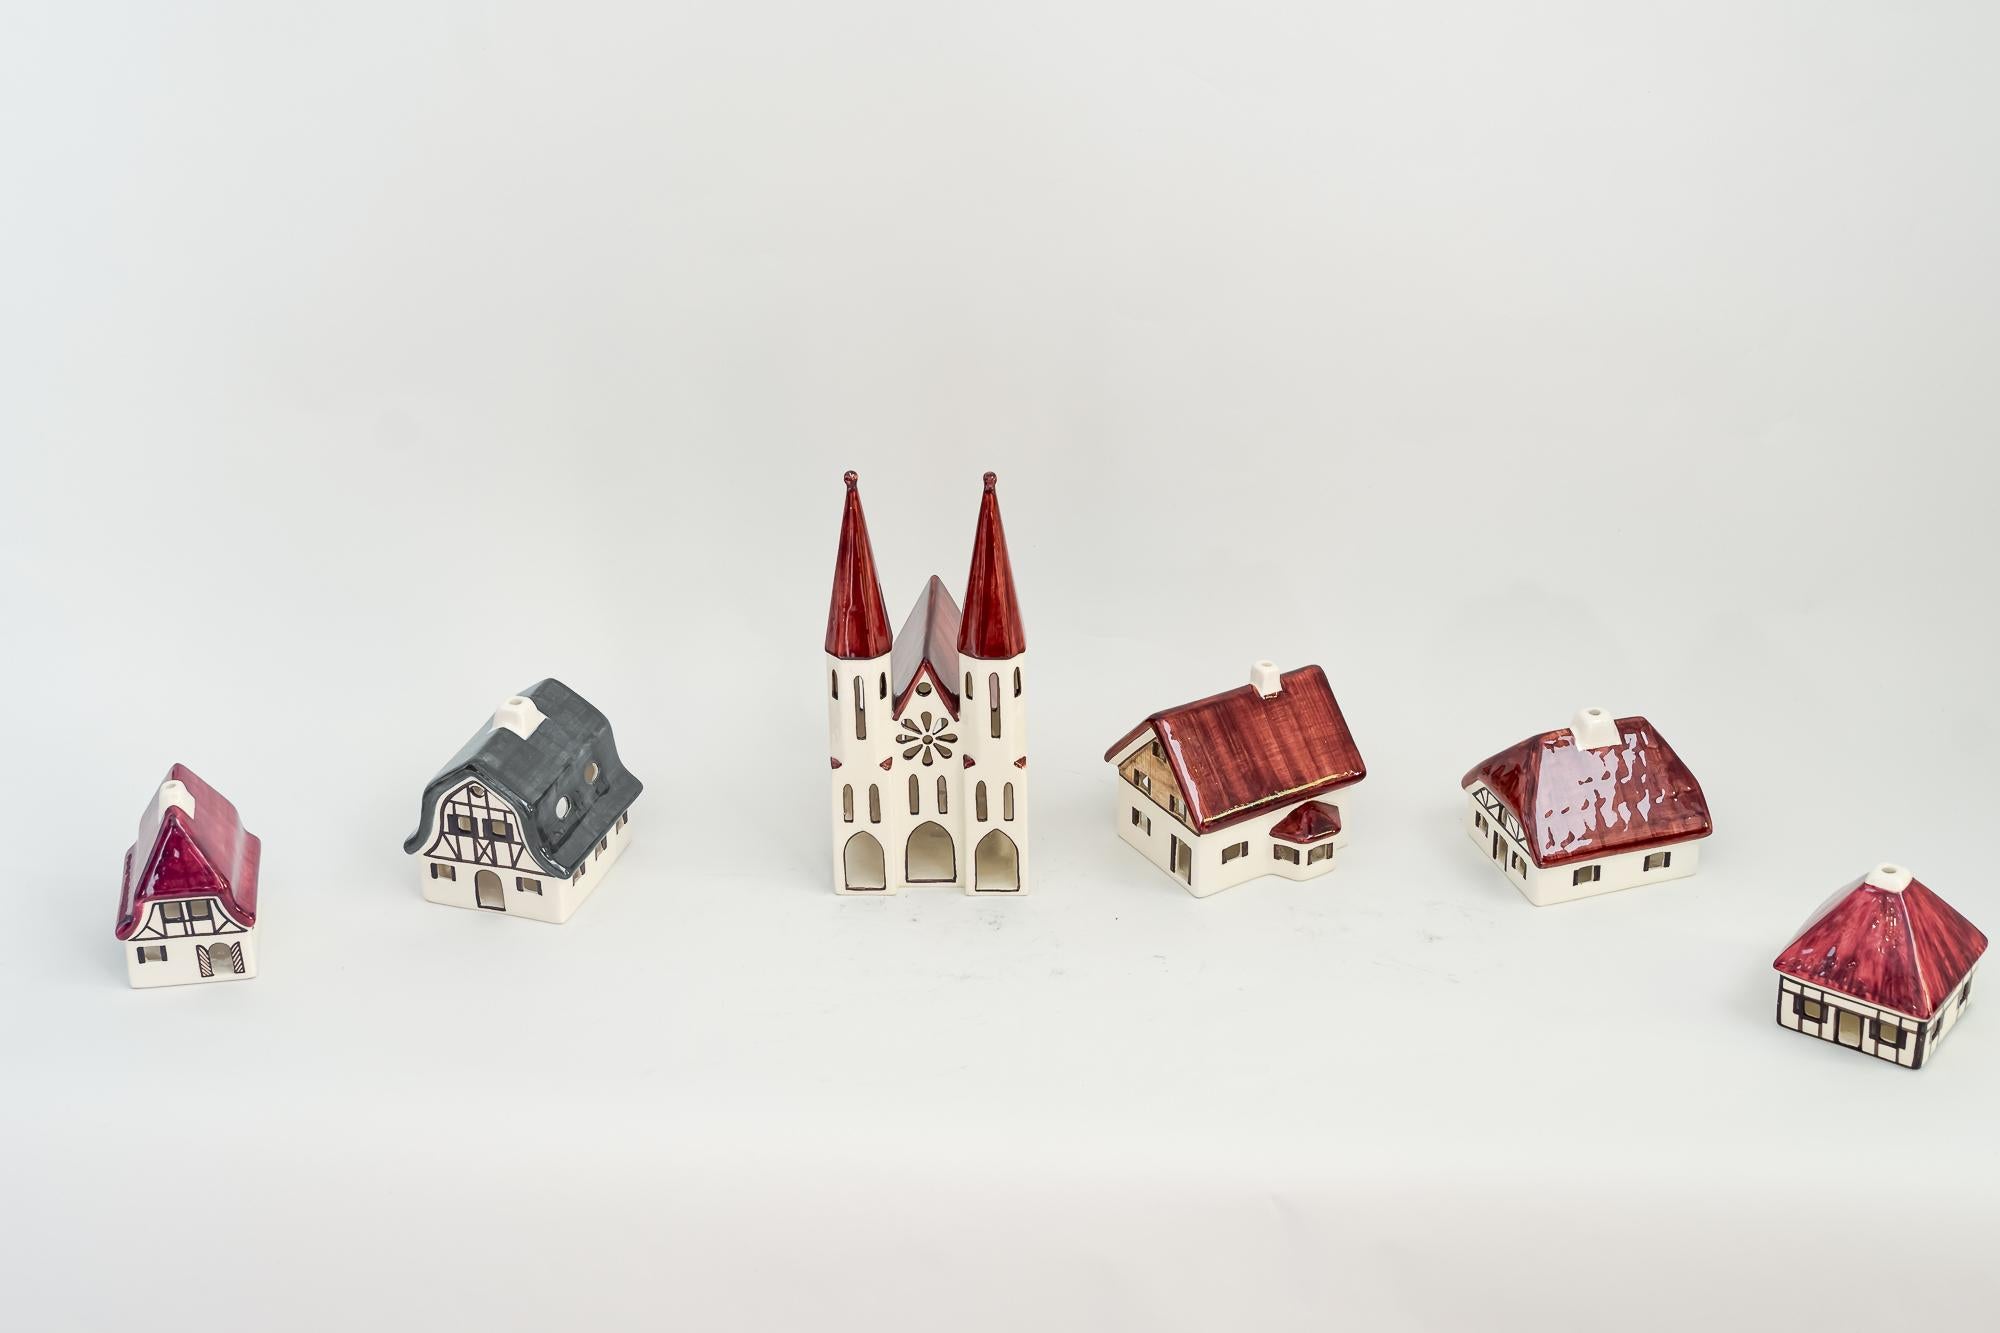 Handcrafted Christmas ceramic houses for candle light deco in shape of a village around 1970s

The church dimensions are: 
Hight: 25cm
Wide: 11cm
Deep: 16cm

All others are around : 
Hight: 11 cm
Wide: 10 cm
Deep: 11 cm.